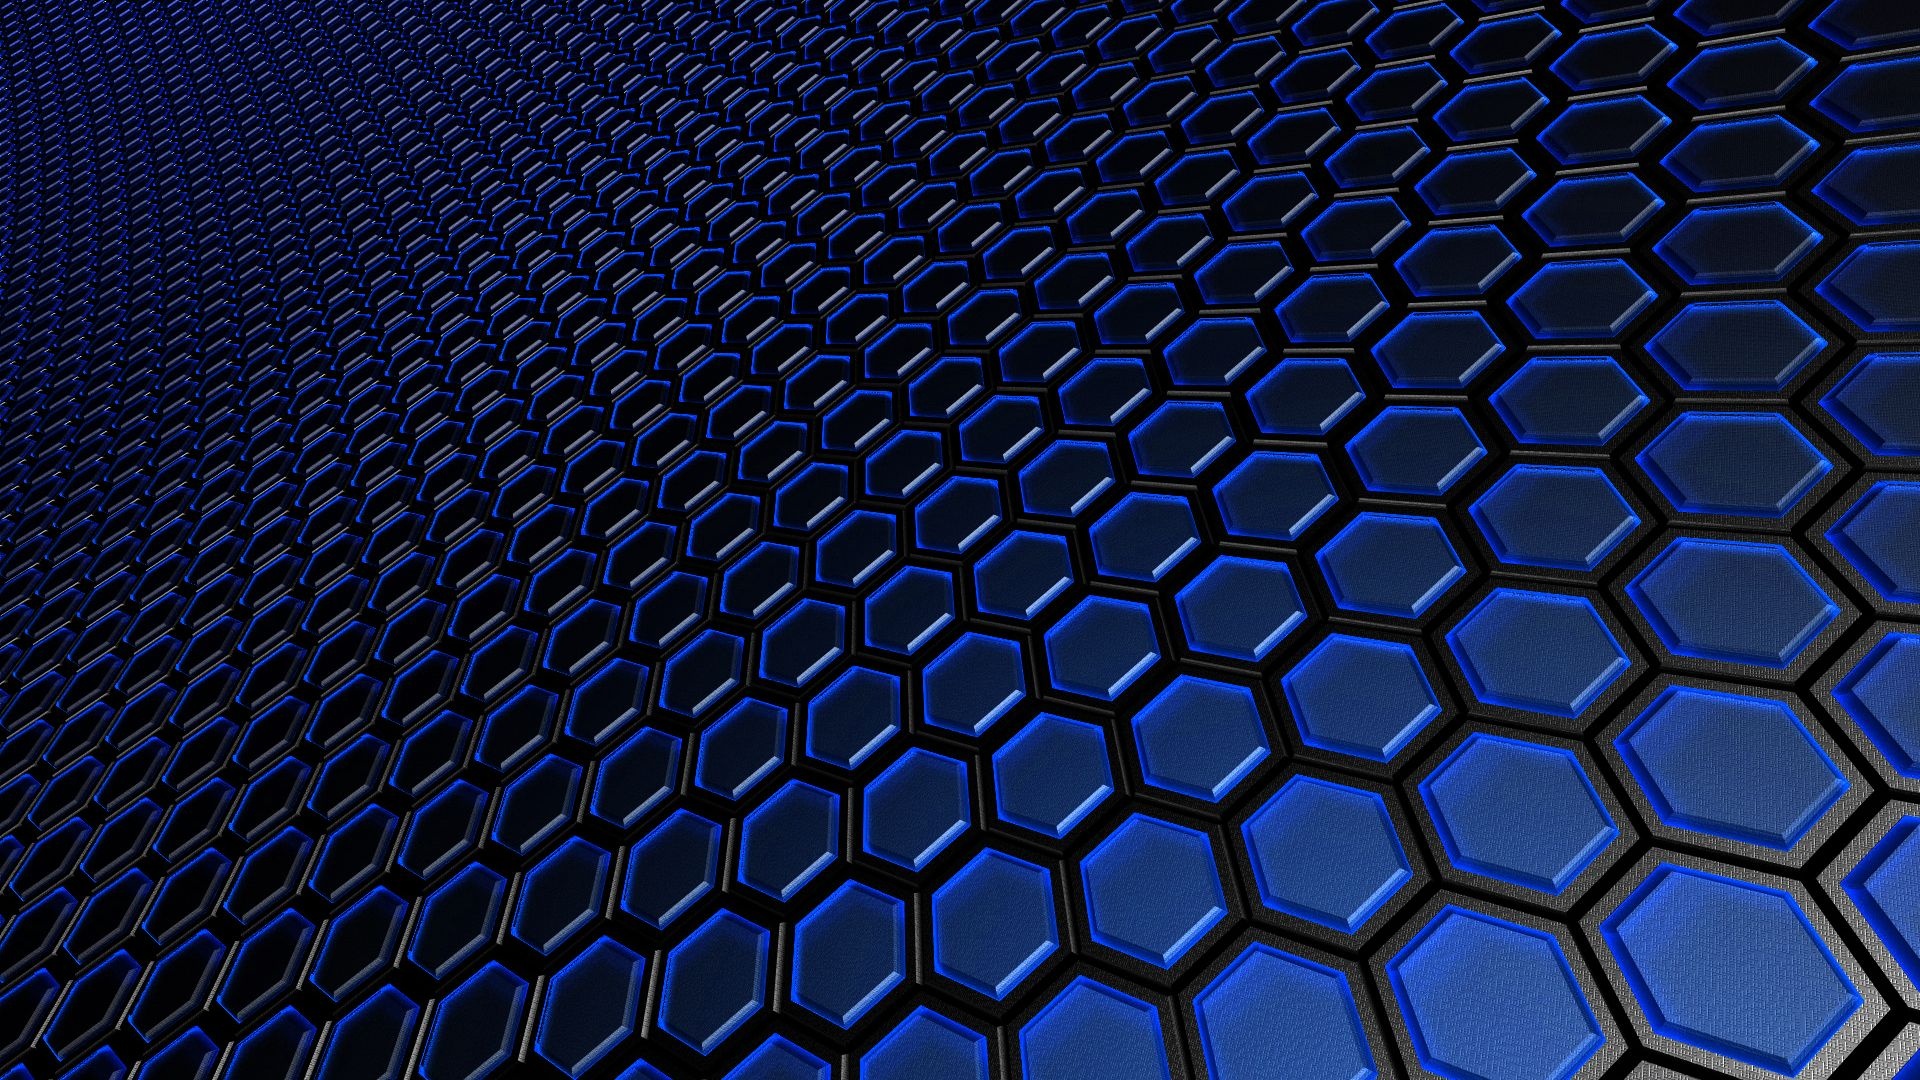 Honeycomb, Blue wallpapers, Geometric pattern, Abstract backgrounds, 1920x1080 Full HD Desktop